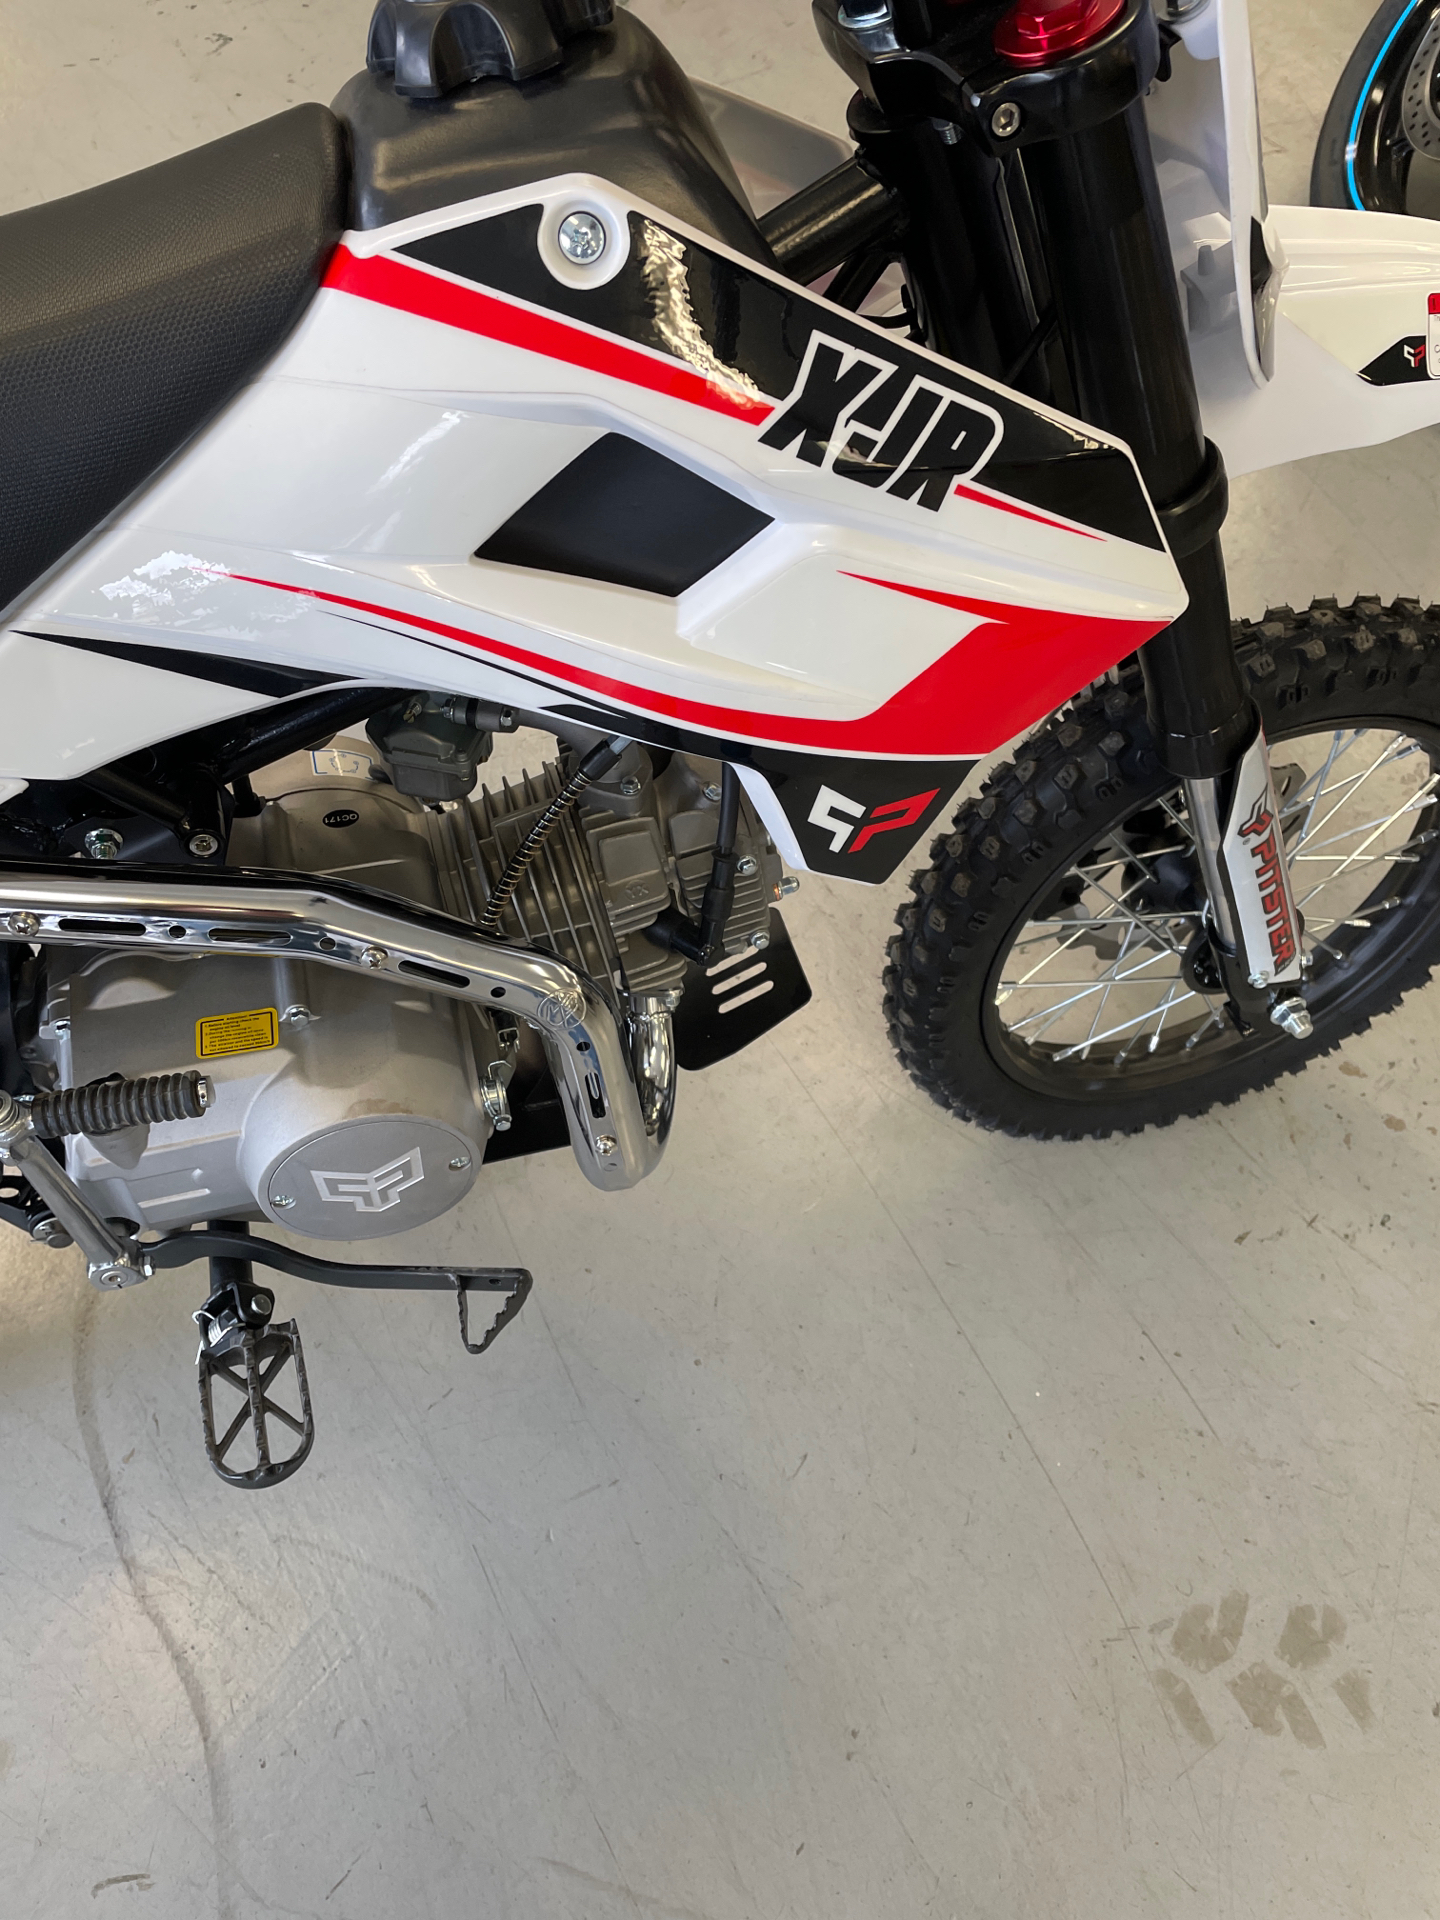 2021 Pitster Pro XJR125 MANUAL in Annville, Pennsylvania - Photo 2